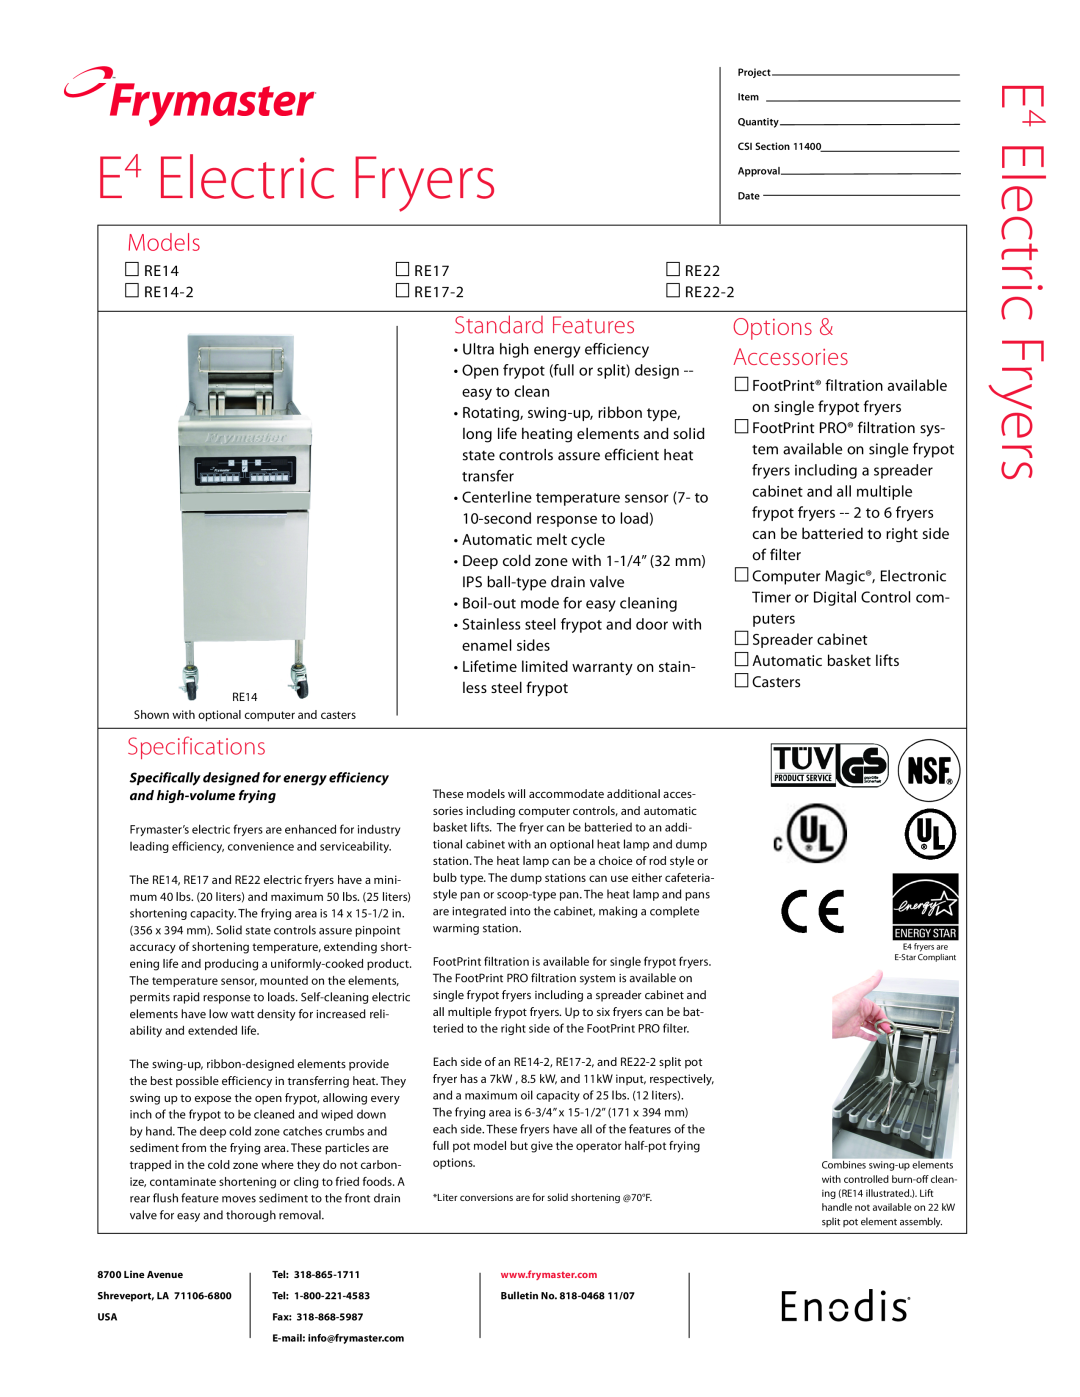 Frymaster RE22, RE14-2, RE17 specifications Frymaster, E4 Electric Fryers, Models, Standard Features, Options, Accessories 